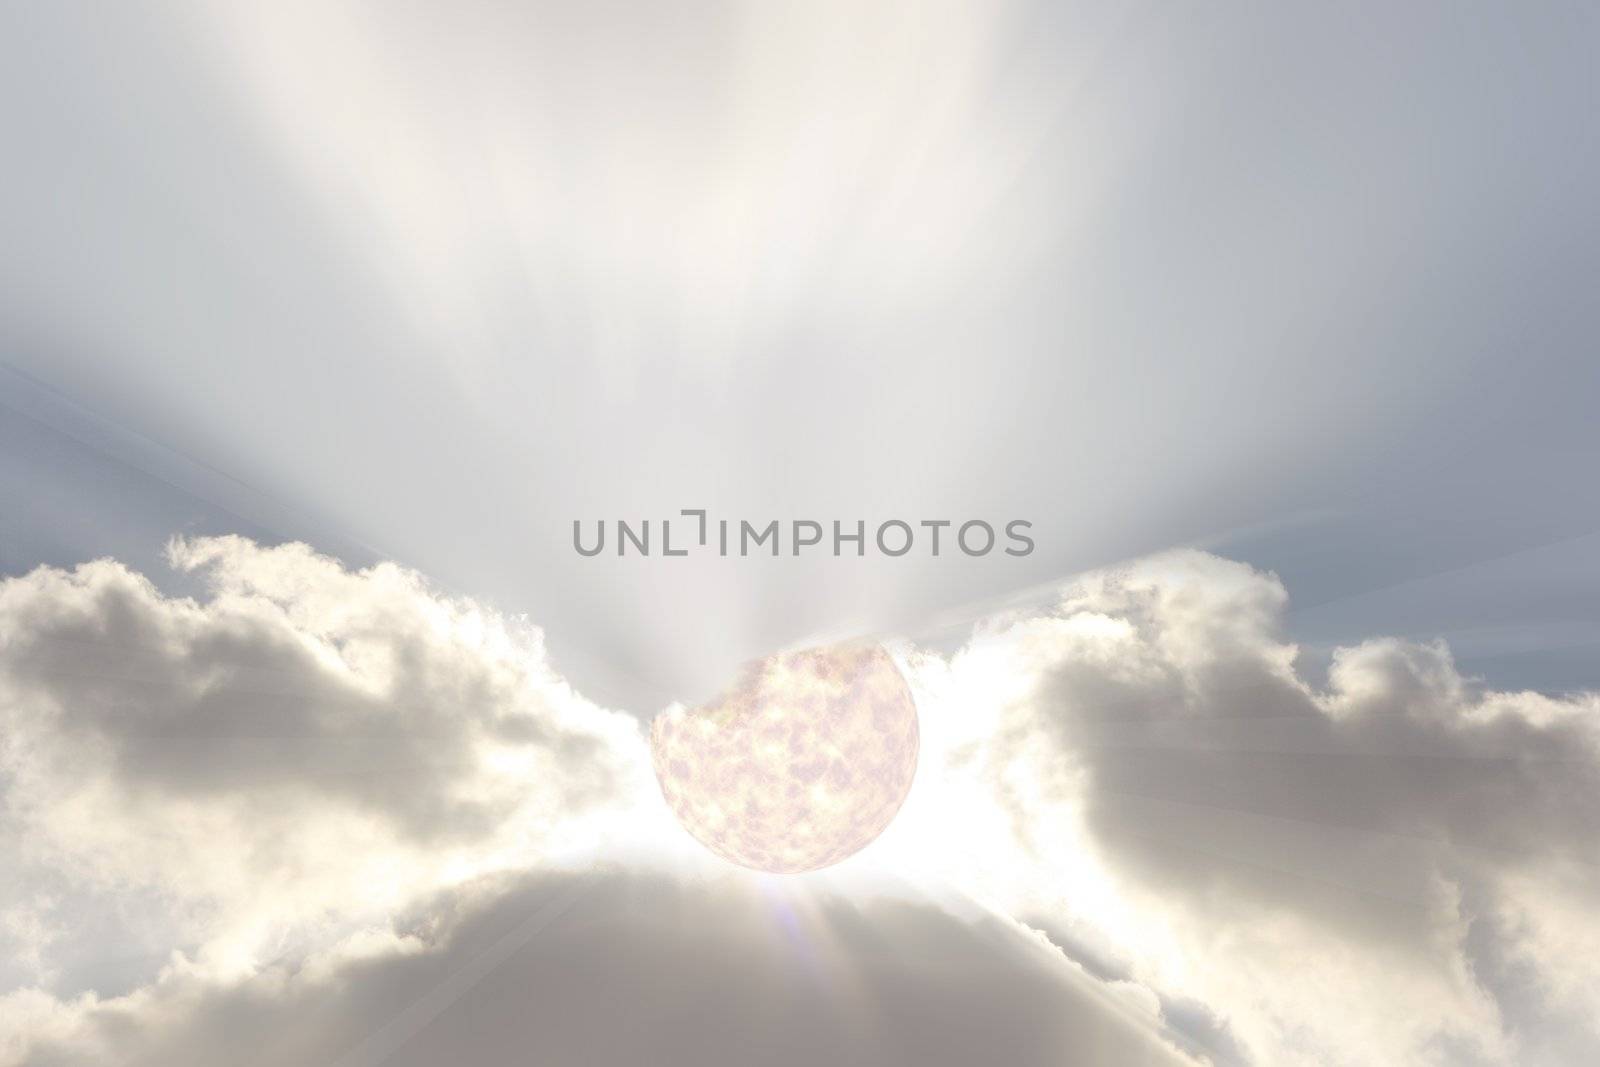 Appearance of Sun Corona and sun beams accentuating through the thick clouds- High resolution and the sun is digital.